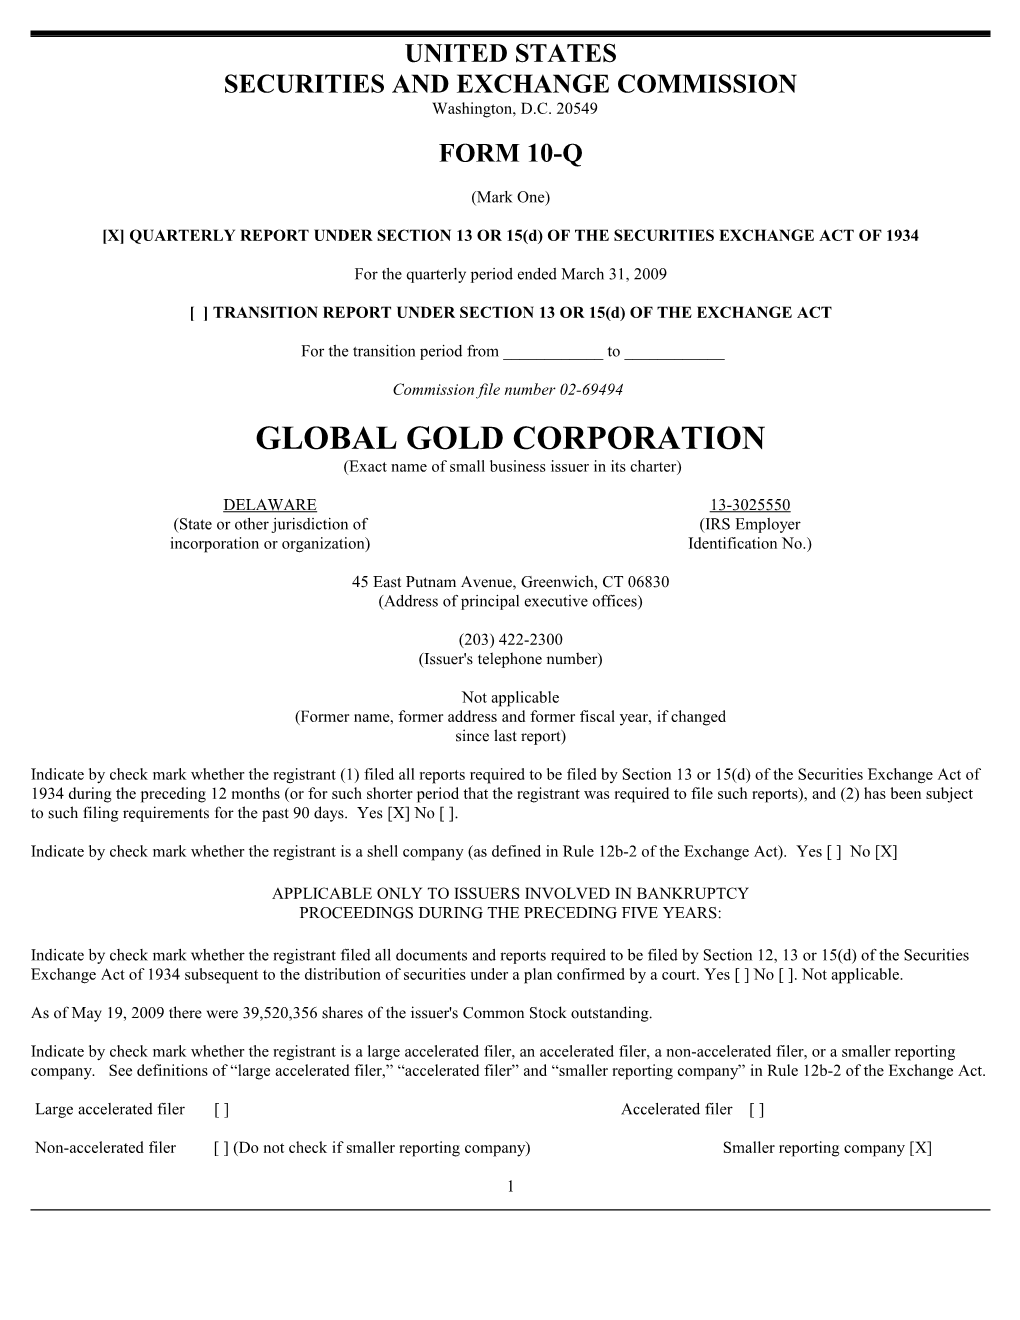 GLOBAL GOLD CORP (Form: 10-Q, Received: 05/19/2009 17:24:03)